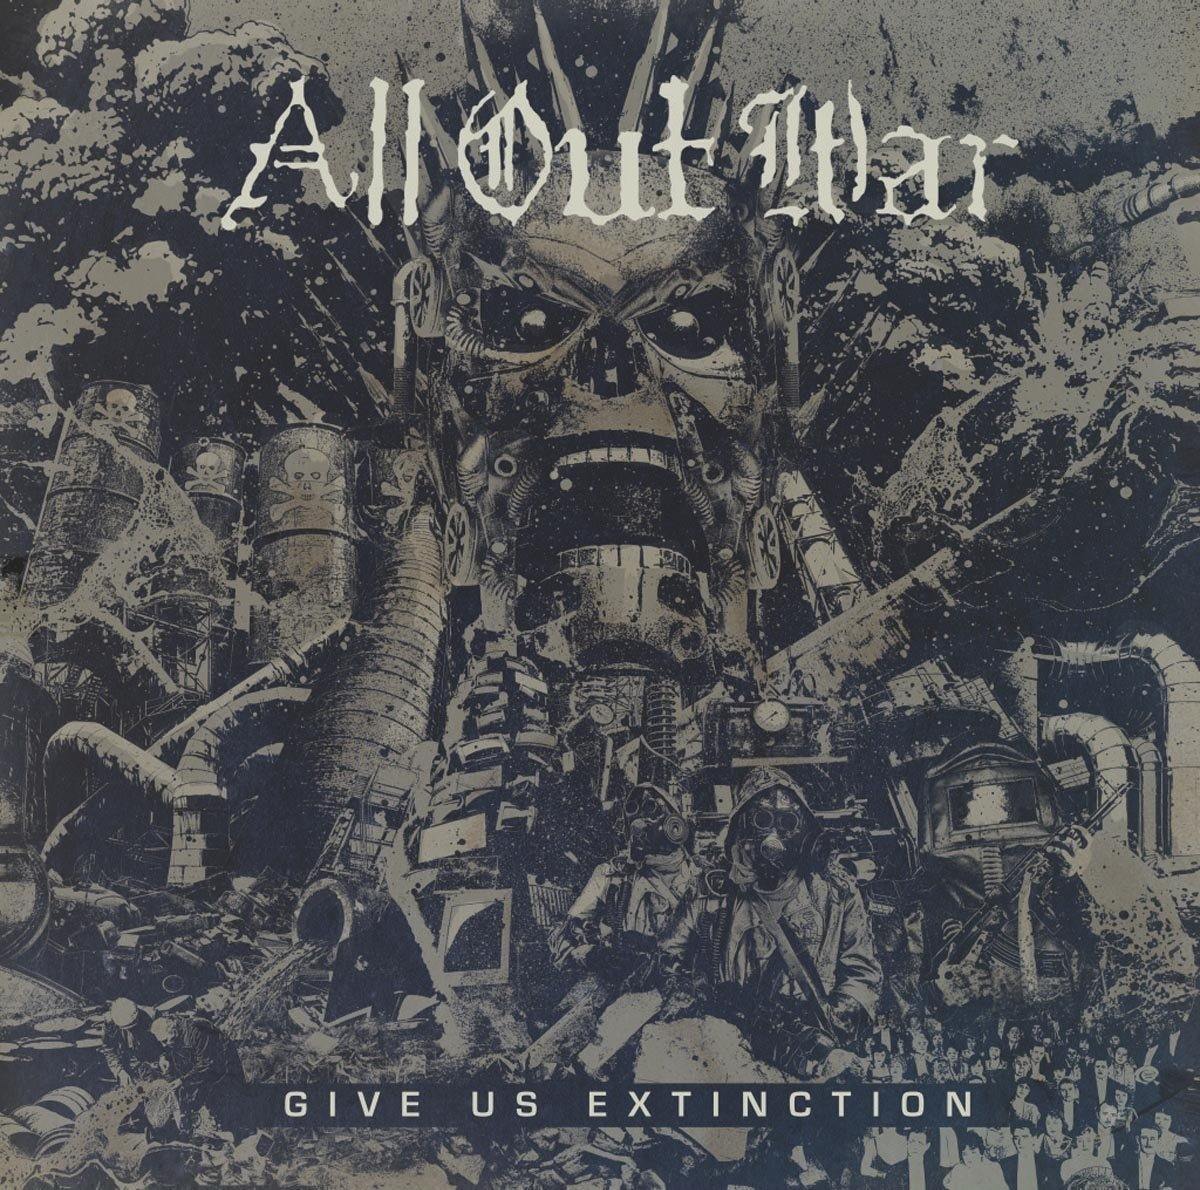 Buy – All Out War "Give Us Extinction" CD – Band & Music Merch – Cold Cuts Merch